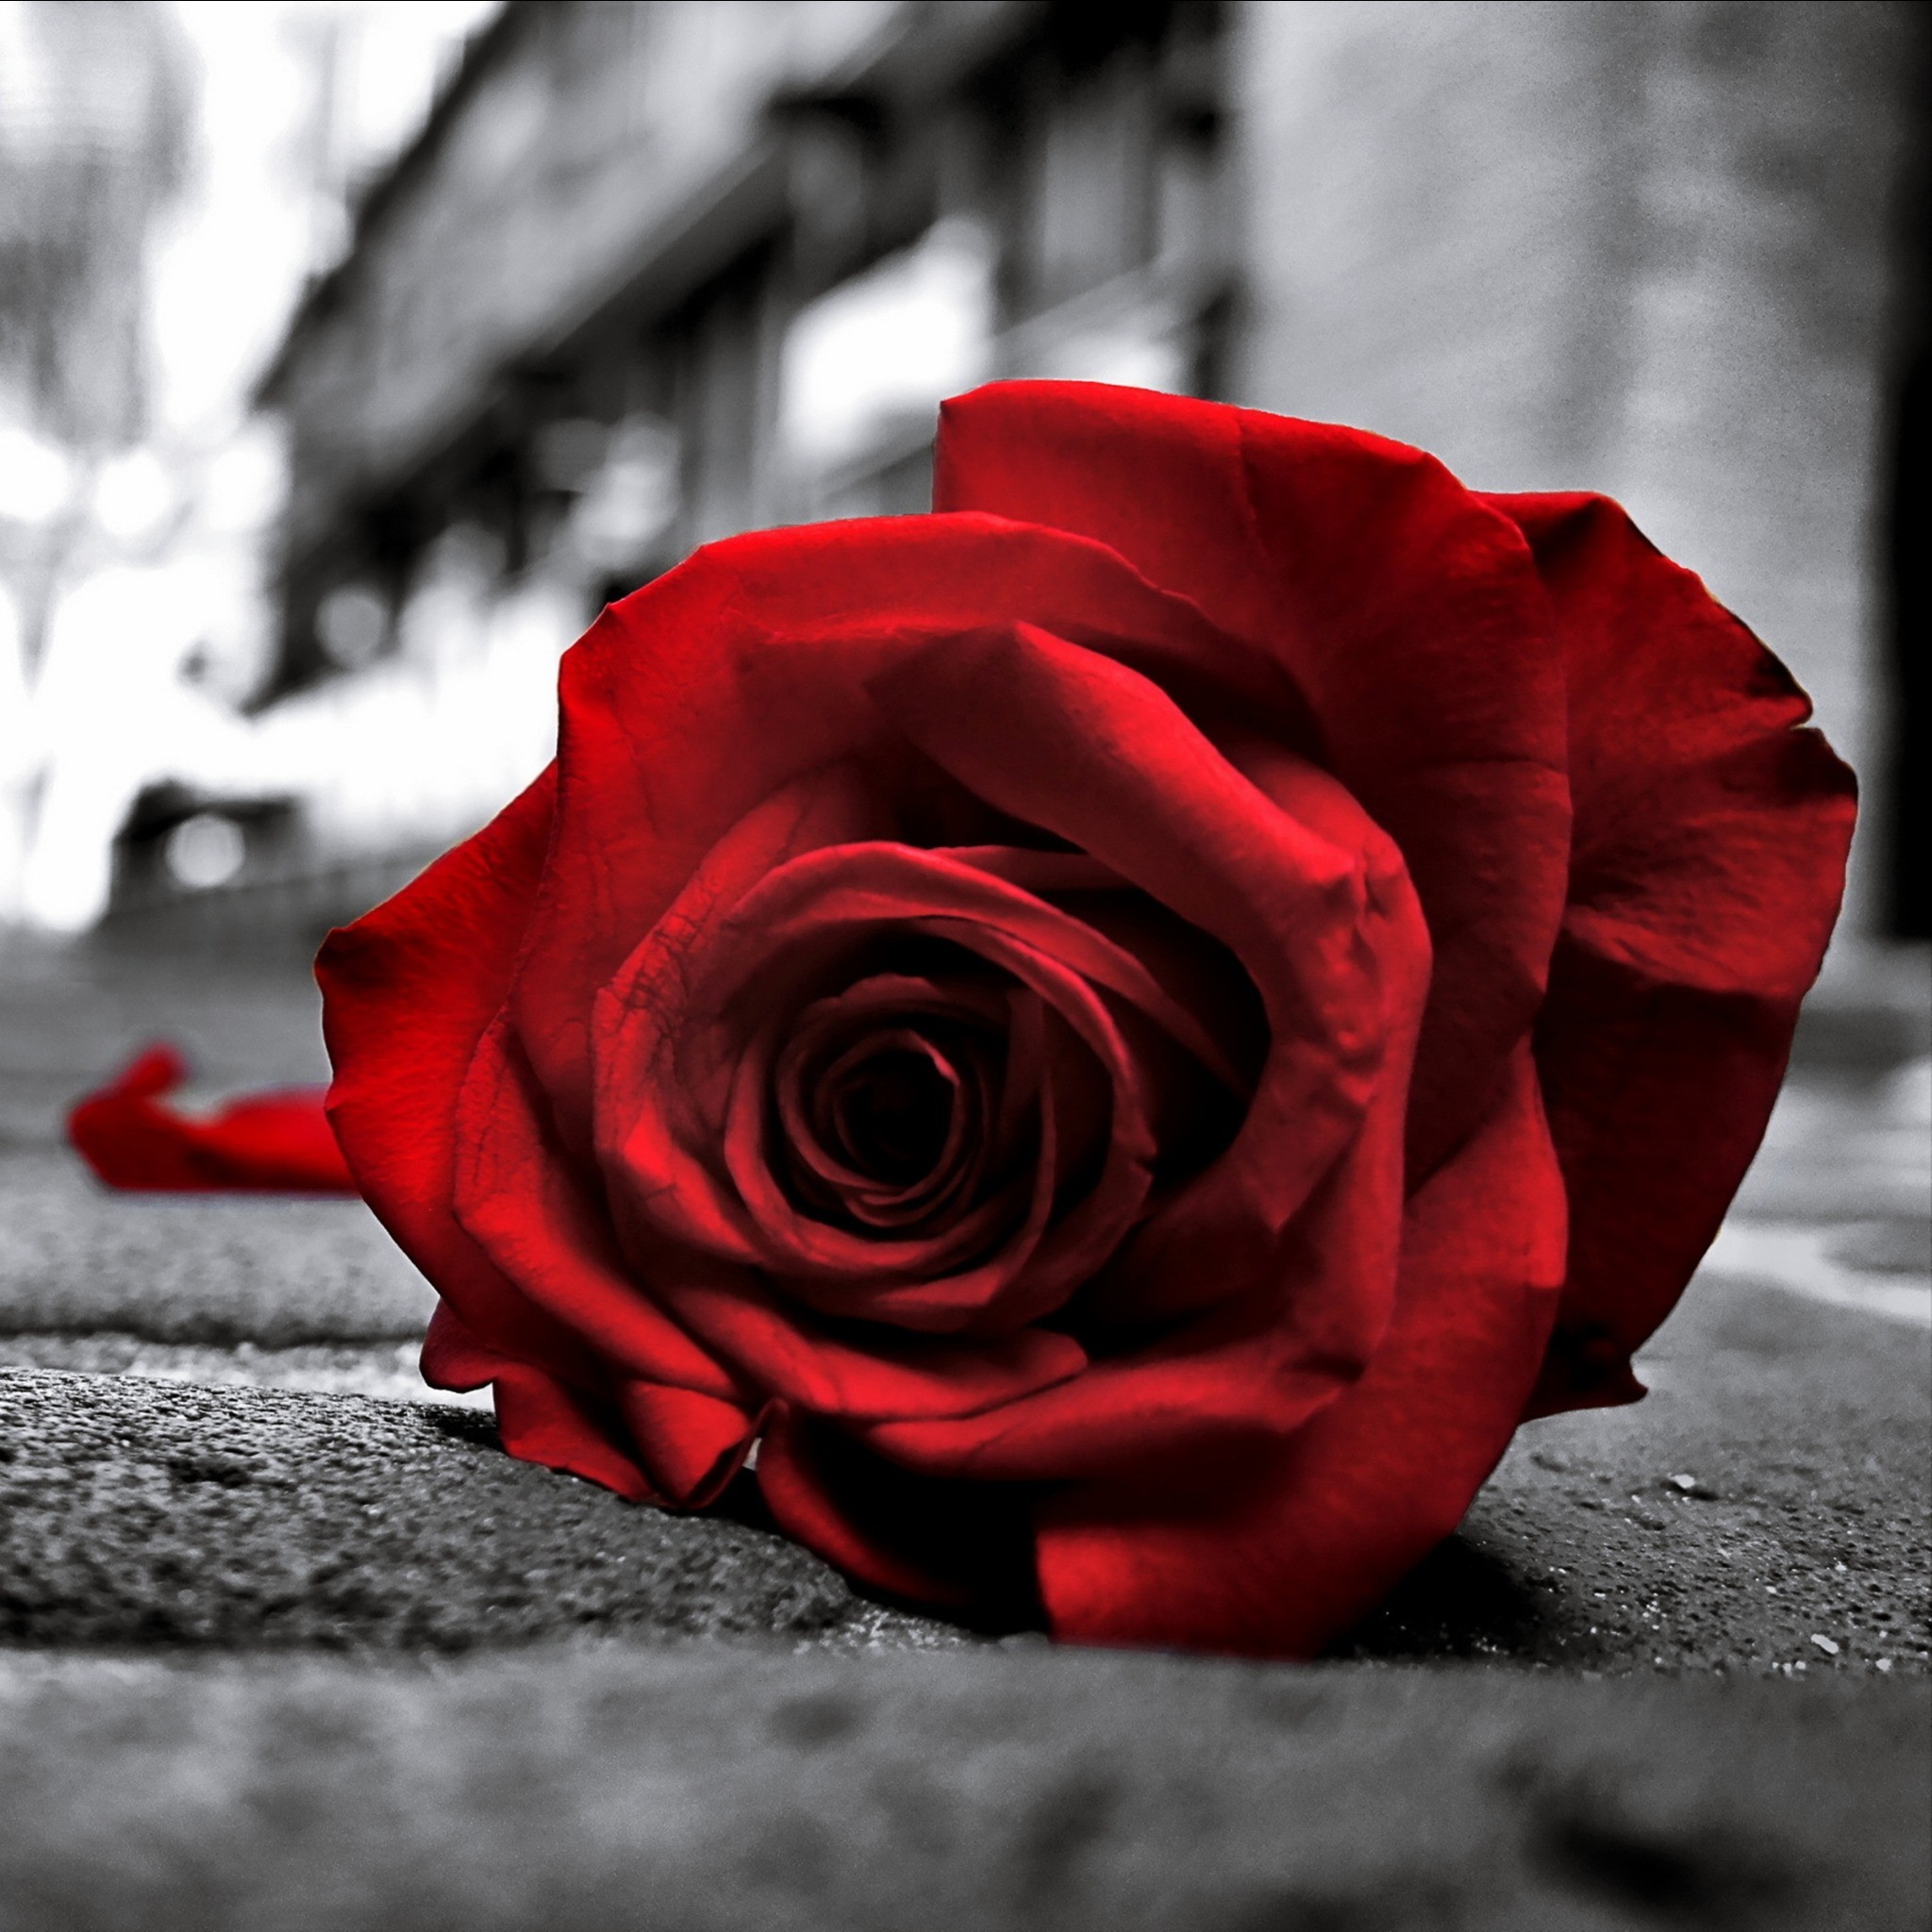 Beautiful Red Rose - Alone Images No Copyright - HD Wallpaper 